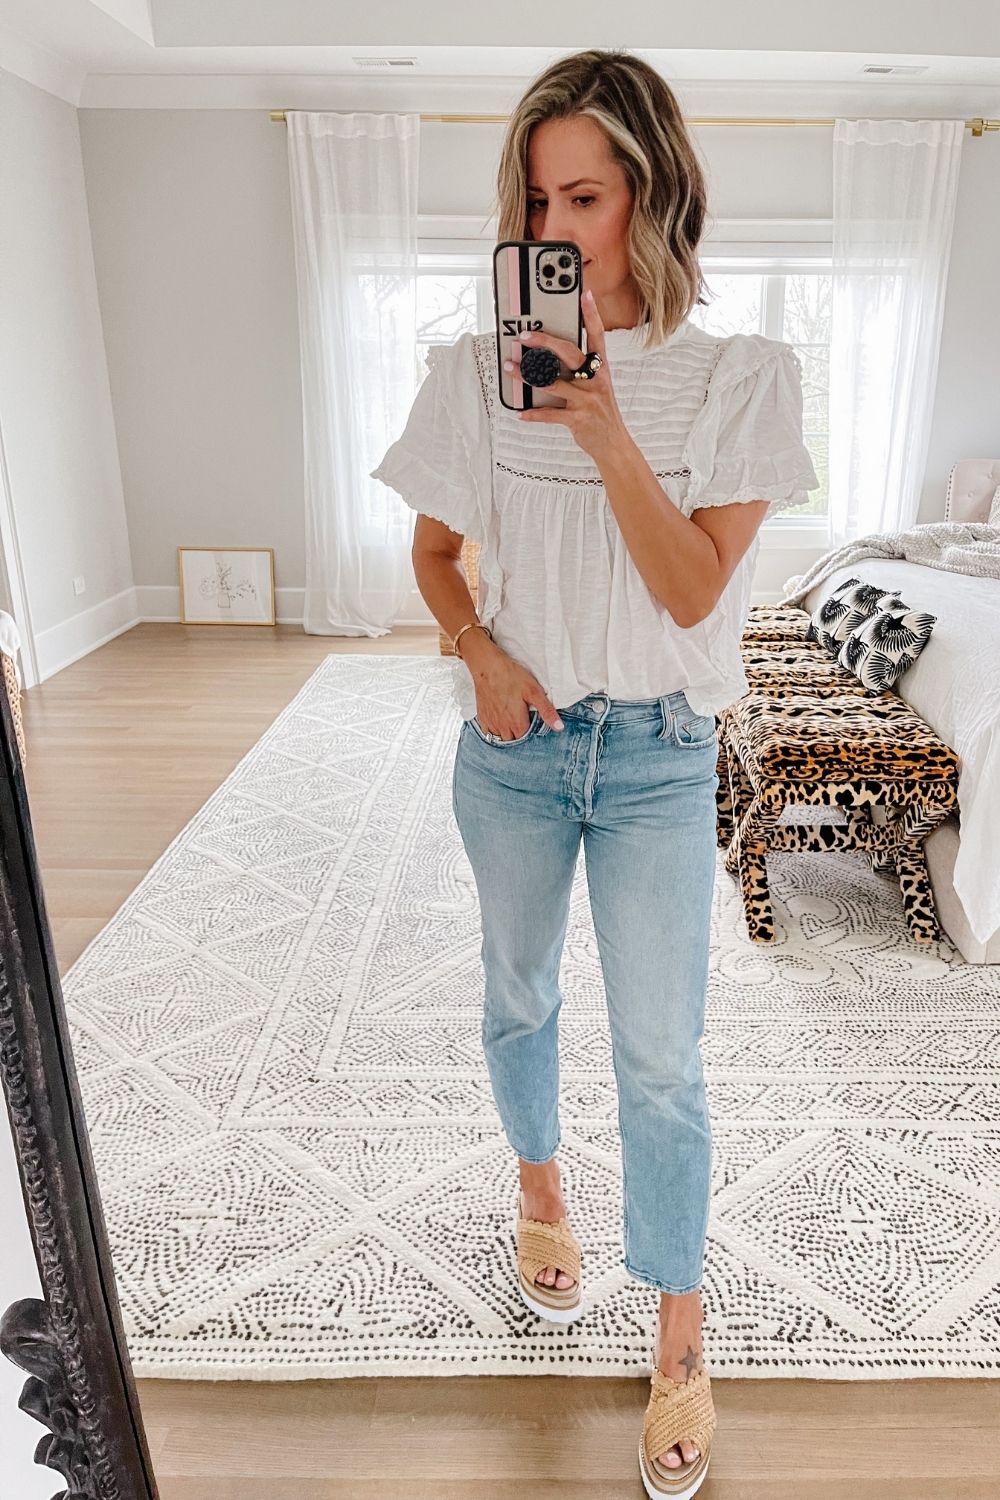 Suzanne wearing a white Free People blouse, denim jeans, and wedges